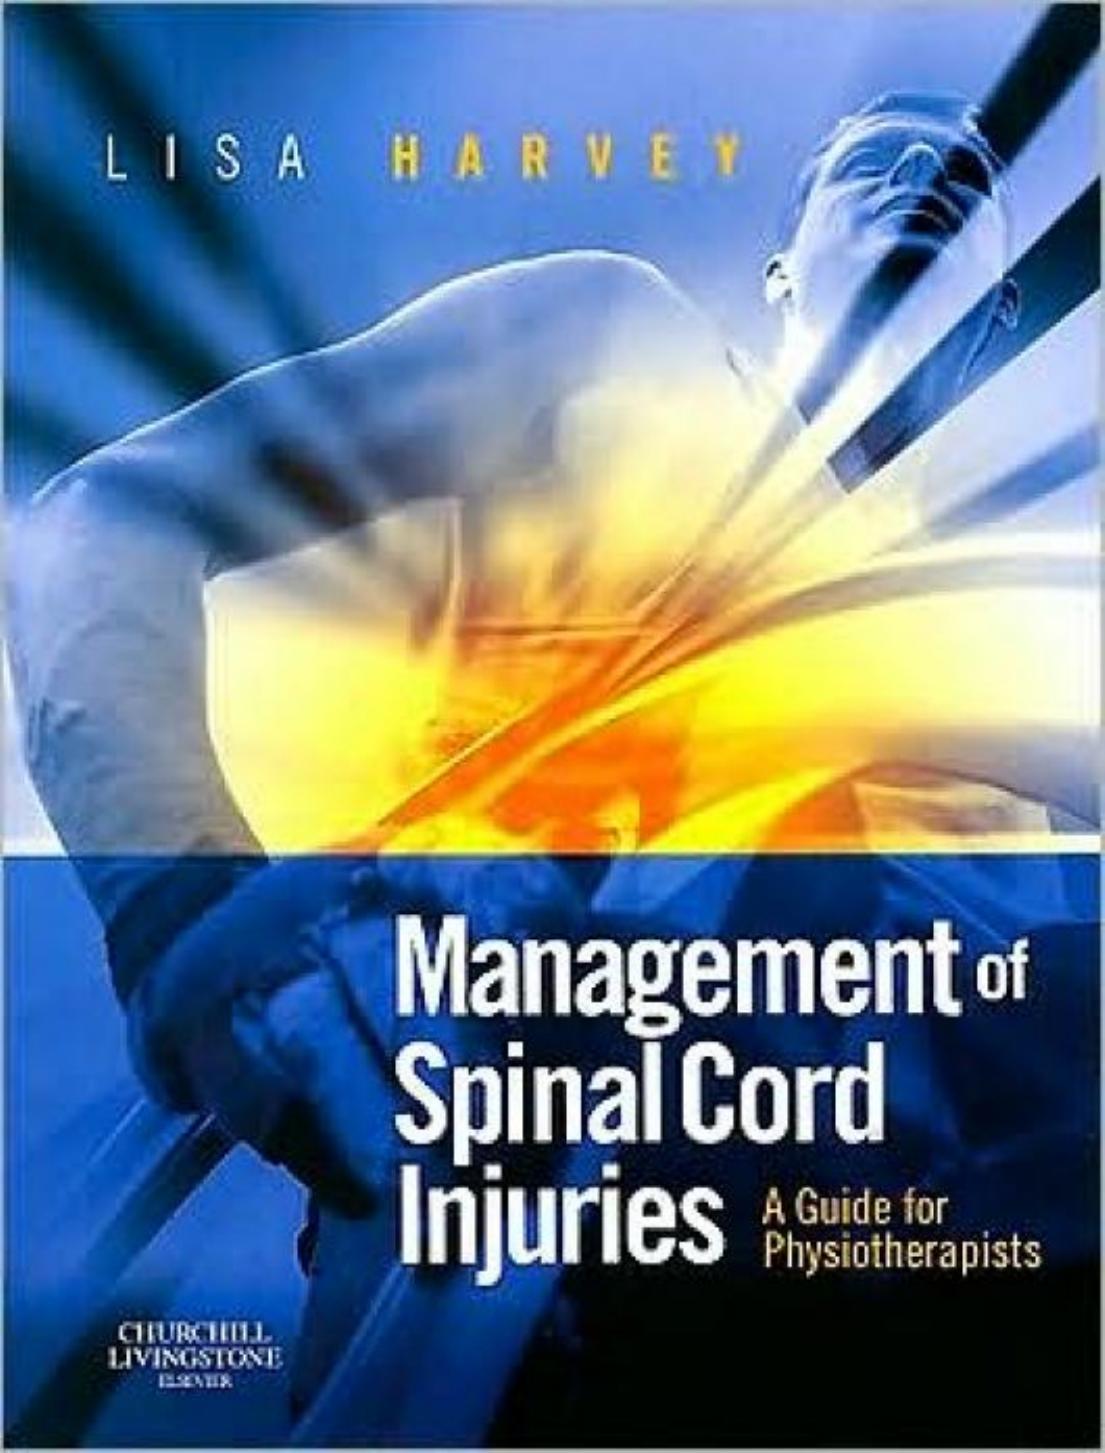 Management of Spinal Cord Injuries: A Guide for Physiotherapists